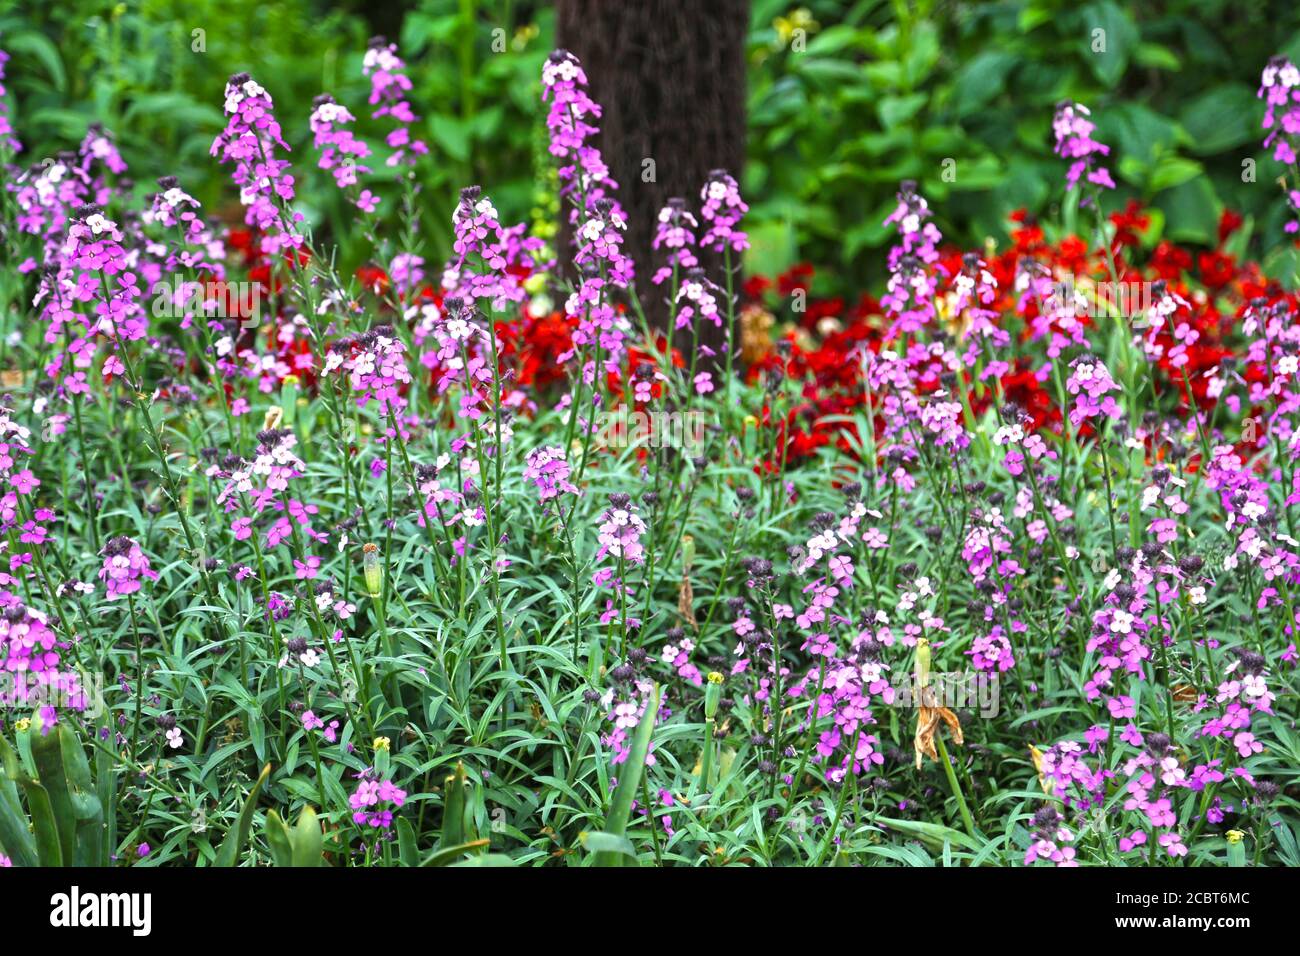 Flowerbed with Erysimum linifolium Bowles Mauve Perennial Wallflower on a spring day Stock Photo